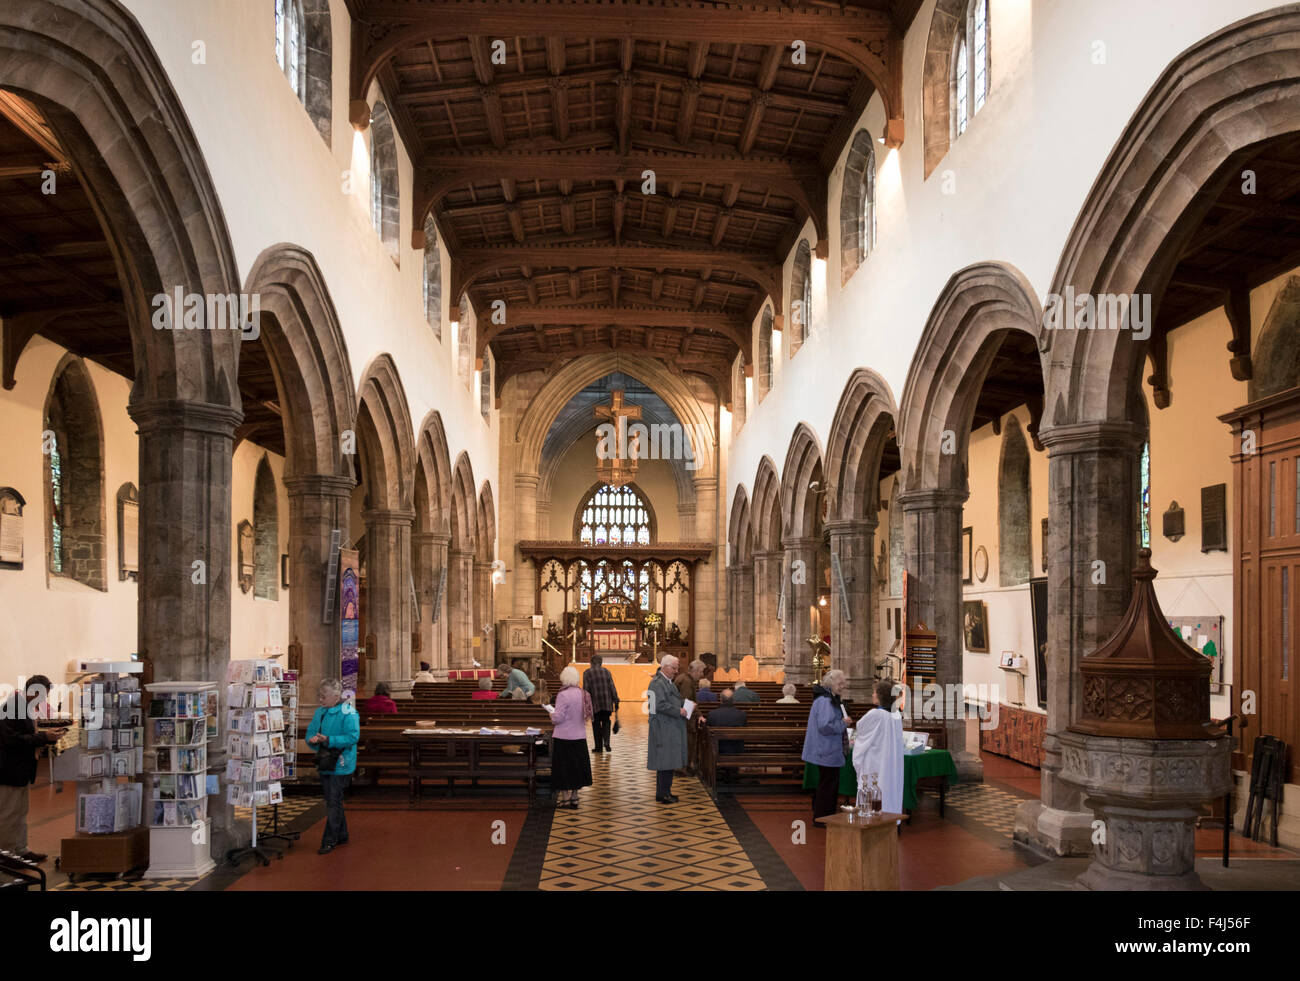 Interior looking East, Bangor Cathedral, Wales, United Kingdom, Europe Stock Photo